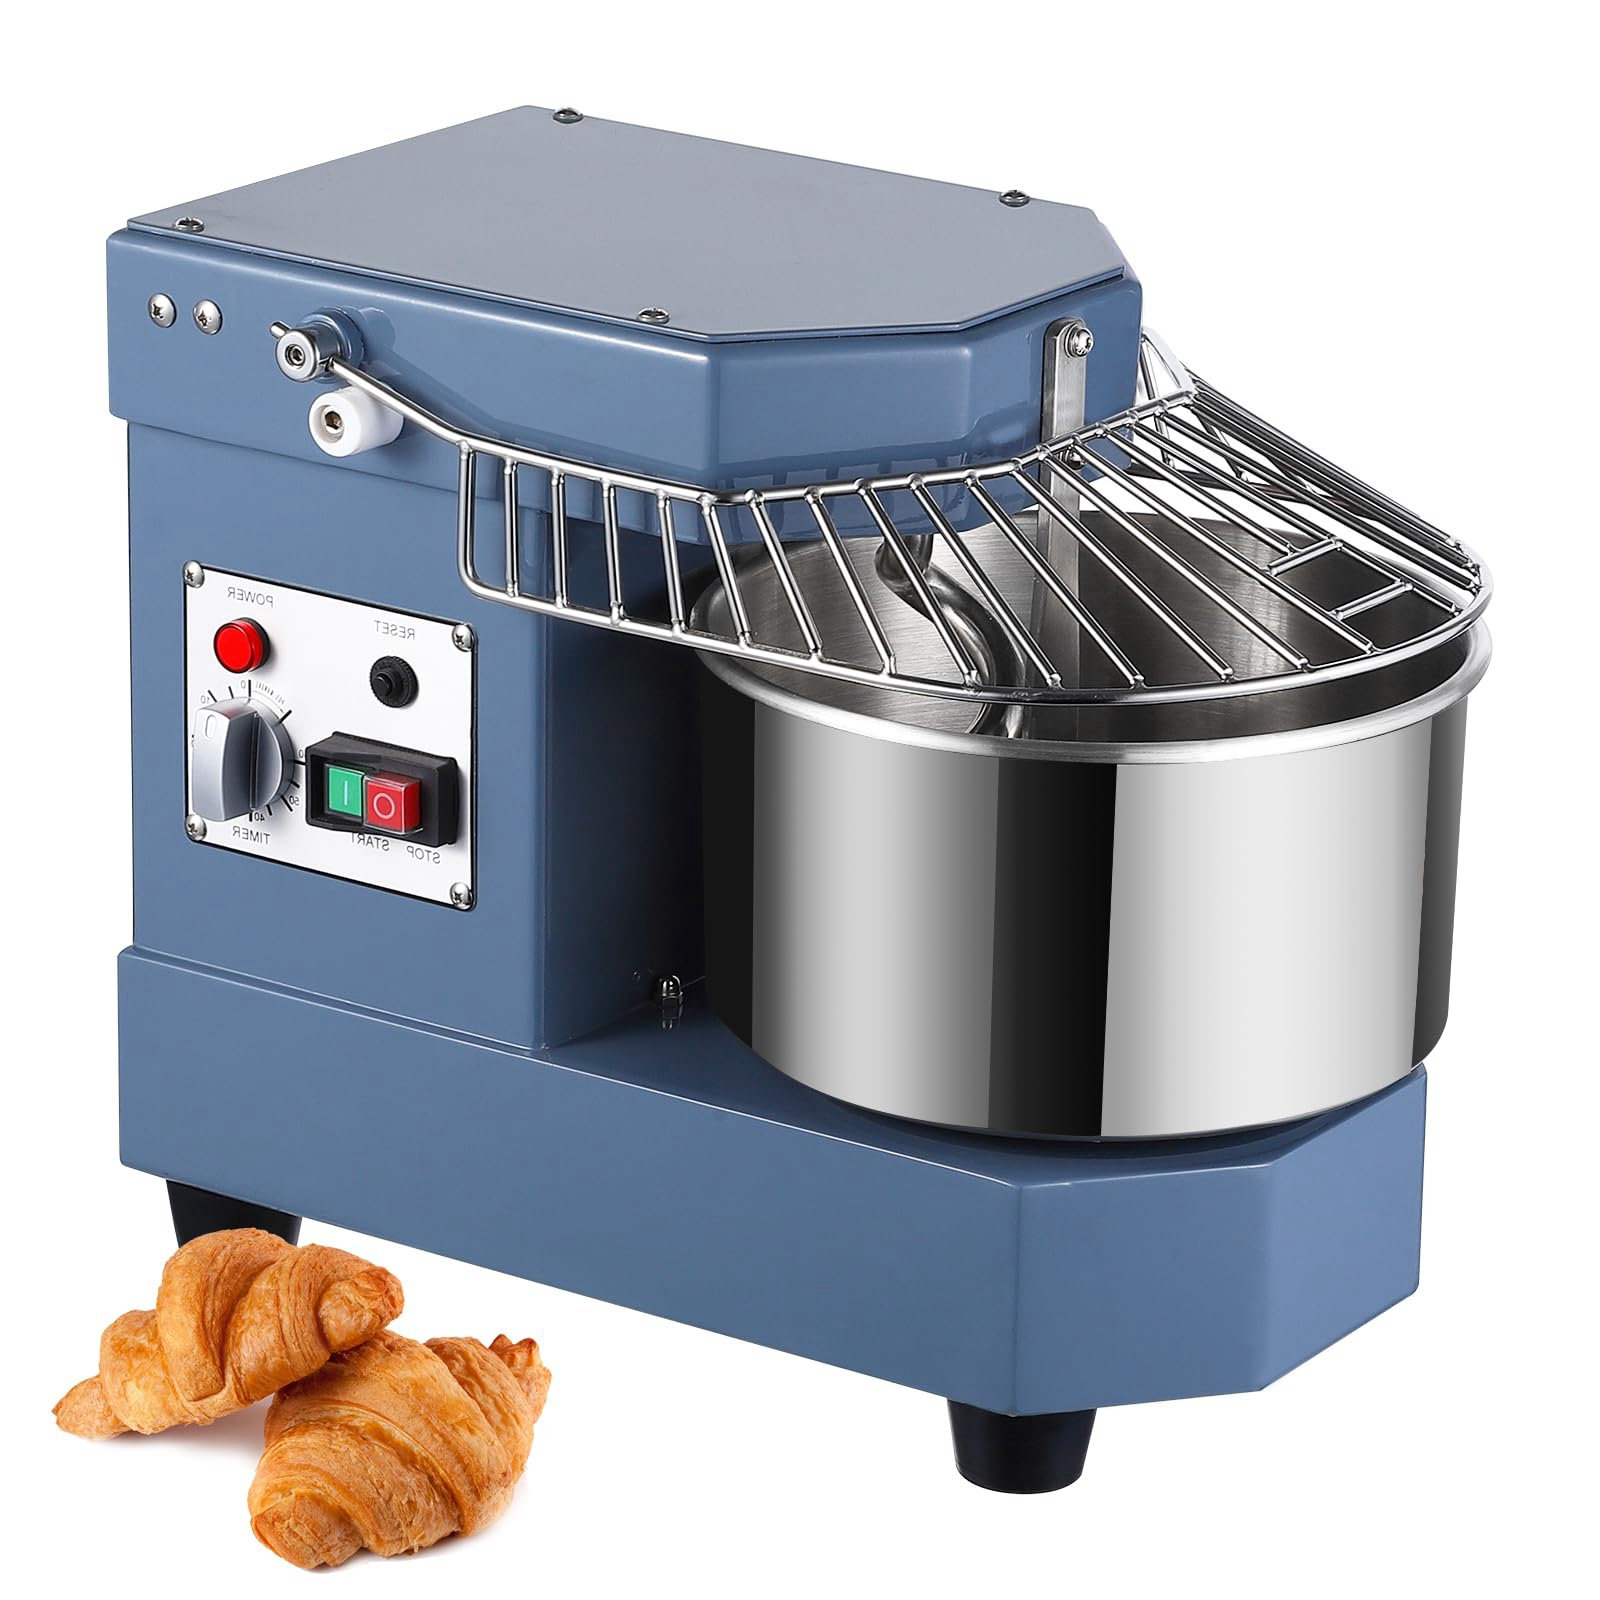 Hakka Commercial Dough Mixer, 5 Qt Spiral Mixer Food Mixer Machine with  Food-grade Stainless Steel Bowl, Security Shield & Timer